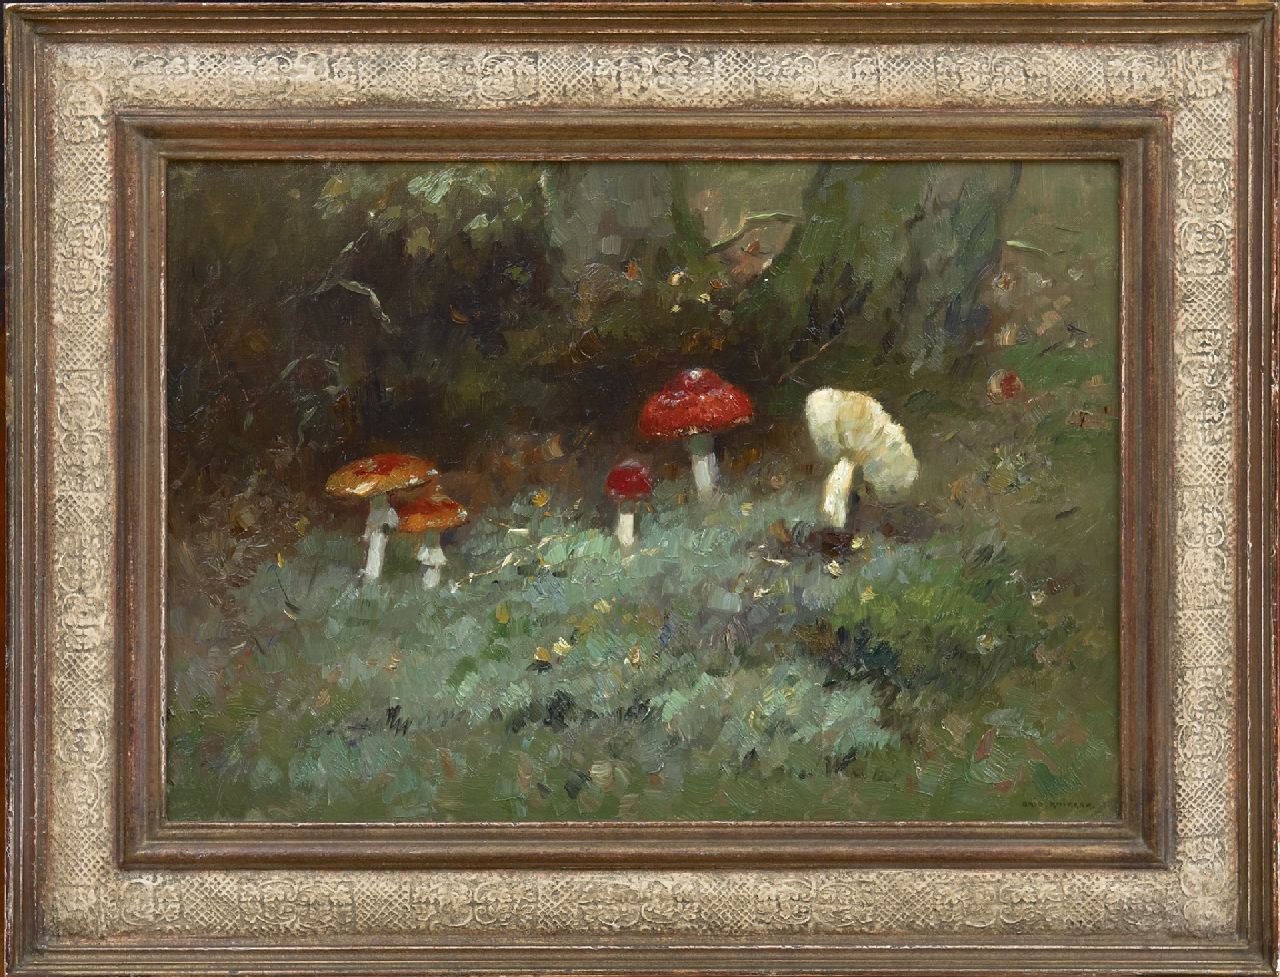 Knikker A.  | Aris Knikker, A still life of the forest ground, oil on canvas 35.2 x 50.3 cm, signed l.r.